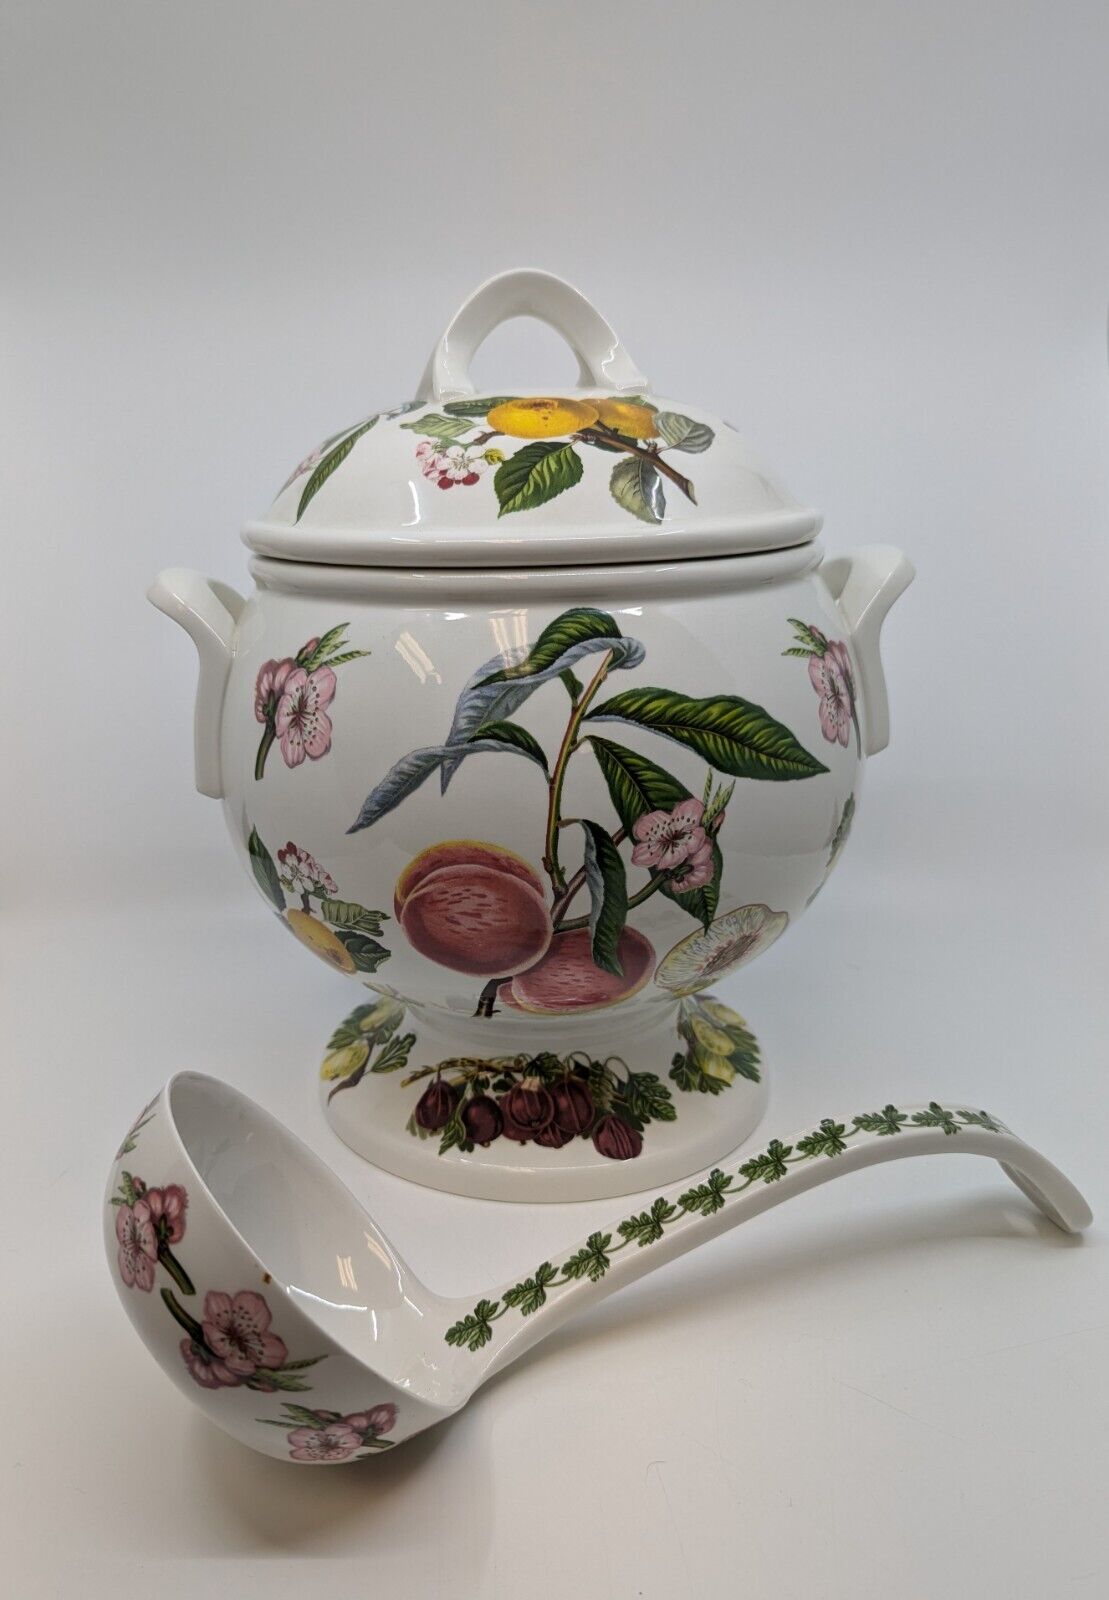 Portmeirion Pomona Fruit and Floral Motif Soup Tureen With Lid and Ladle